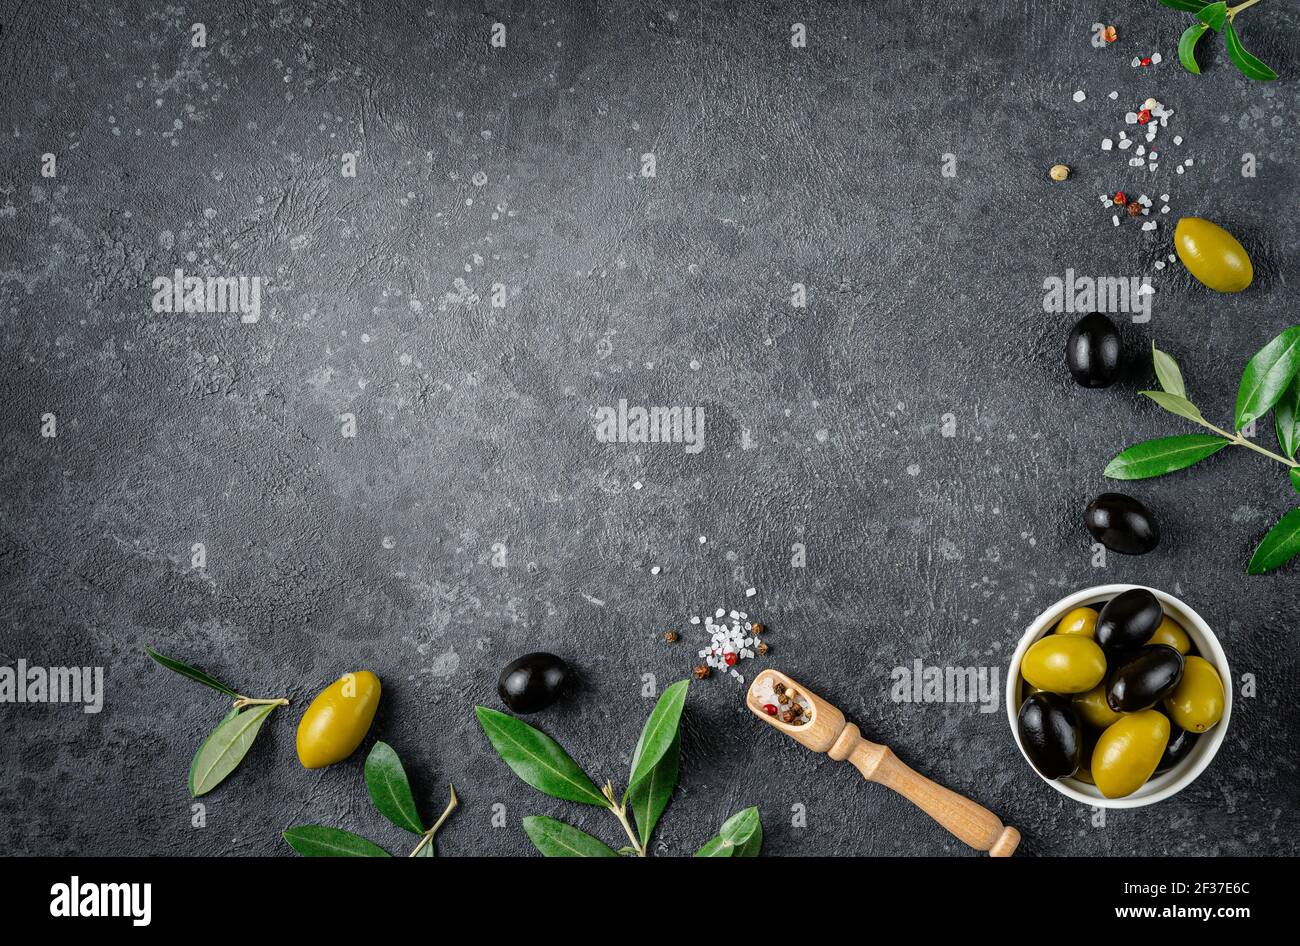 Green and black olives with leaves on dark background. Copy space, flat lay. Stock Photo